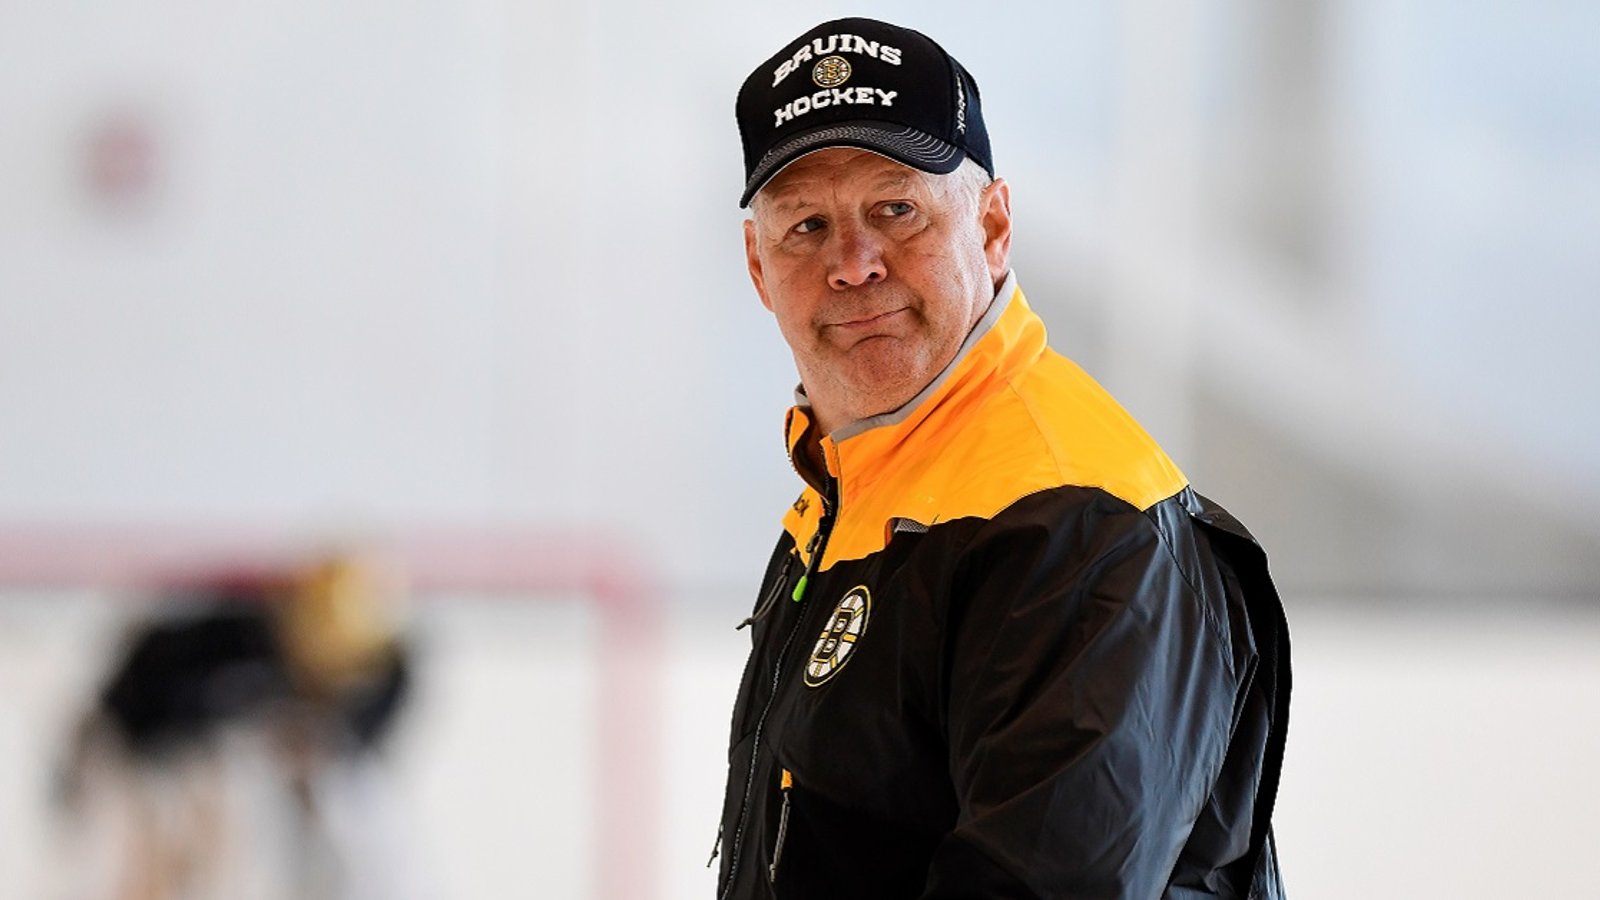 Breaking: Bruins may have held on to Julien to screw rival NHL team.